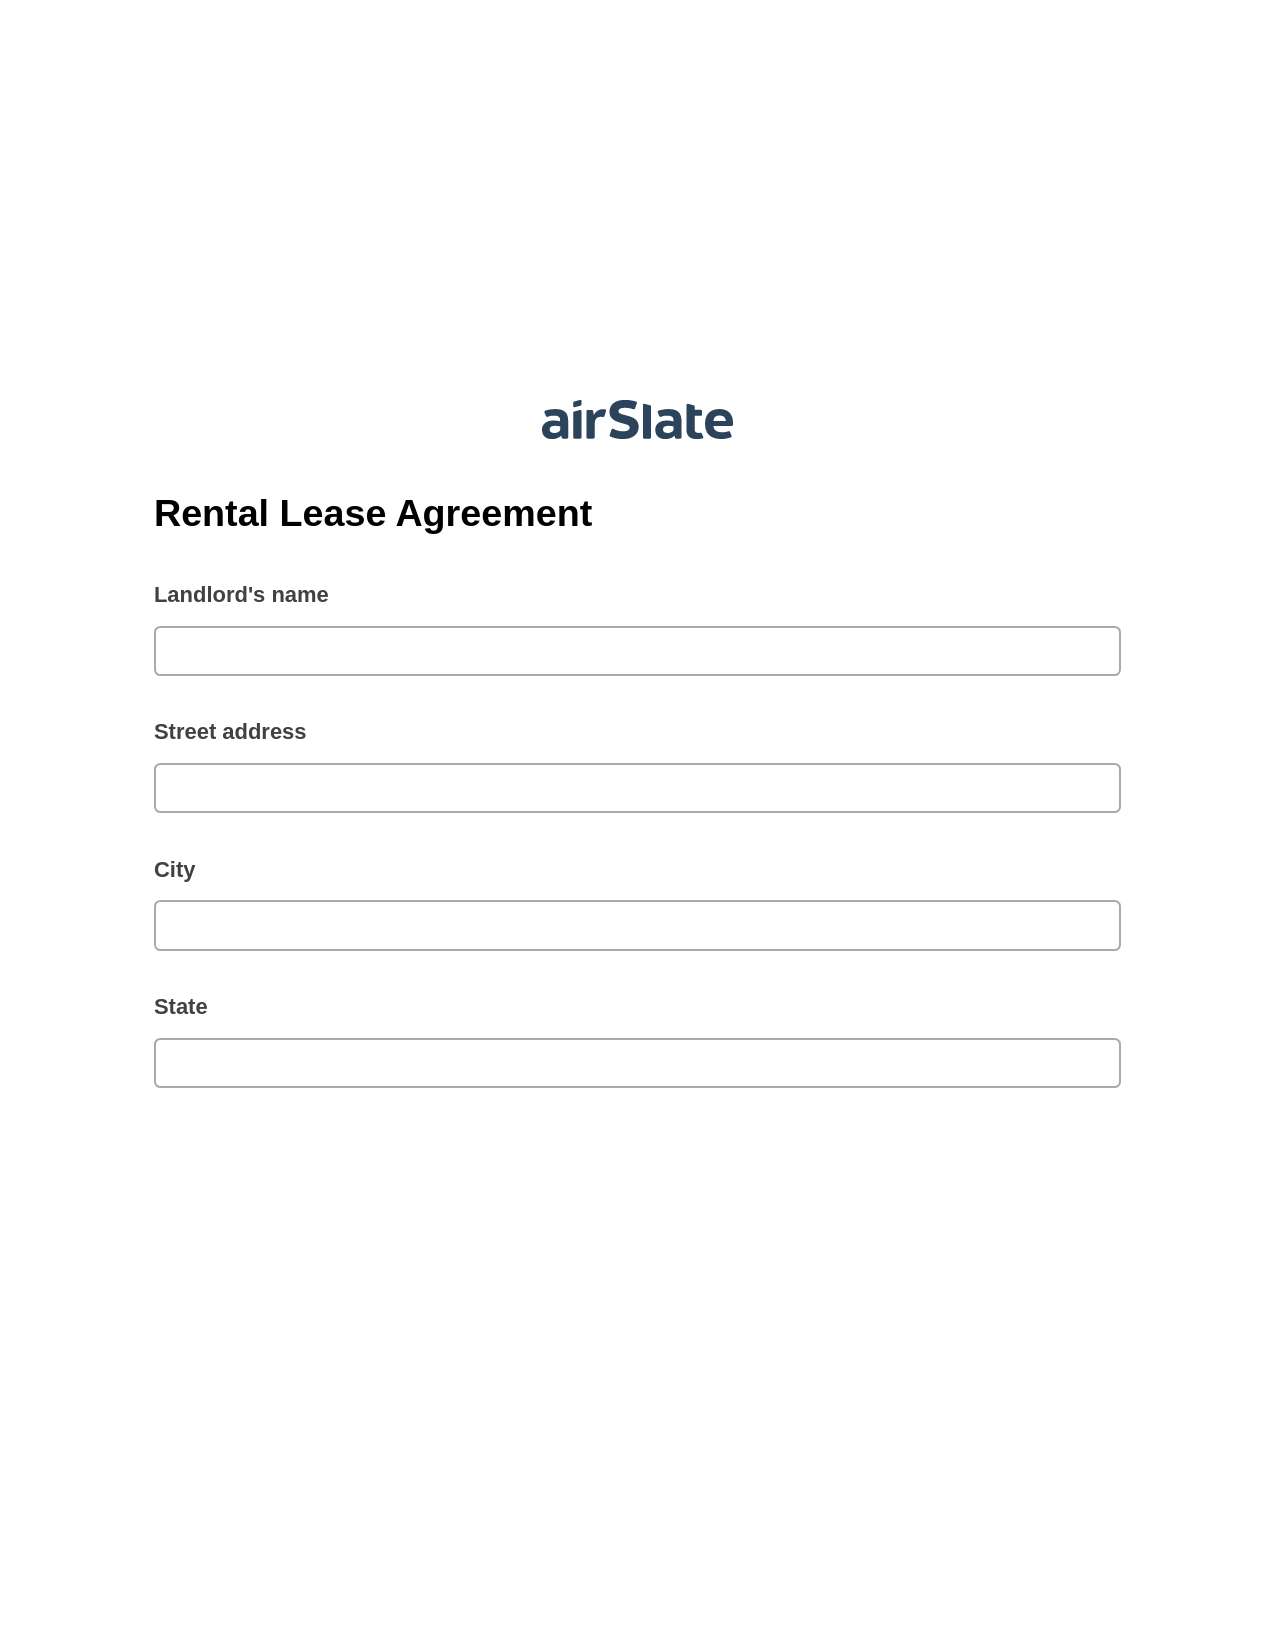 Multirole Rental Lease Agreement Pre-fill from Salesforce Record Bot, Invoke Salesforce Process Bot, Archive to SharePoint Folder Bot